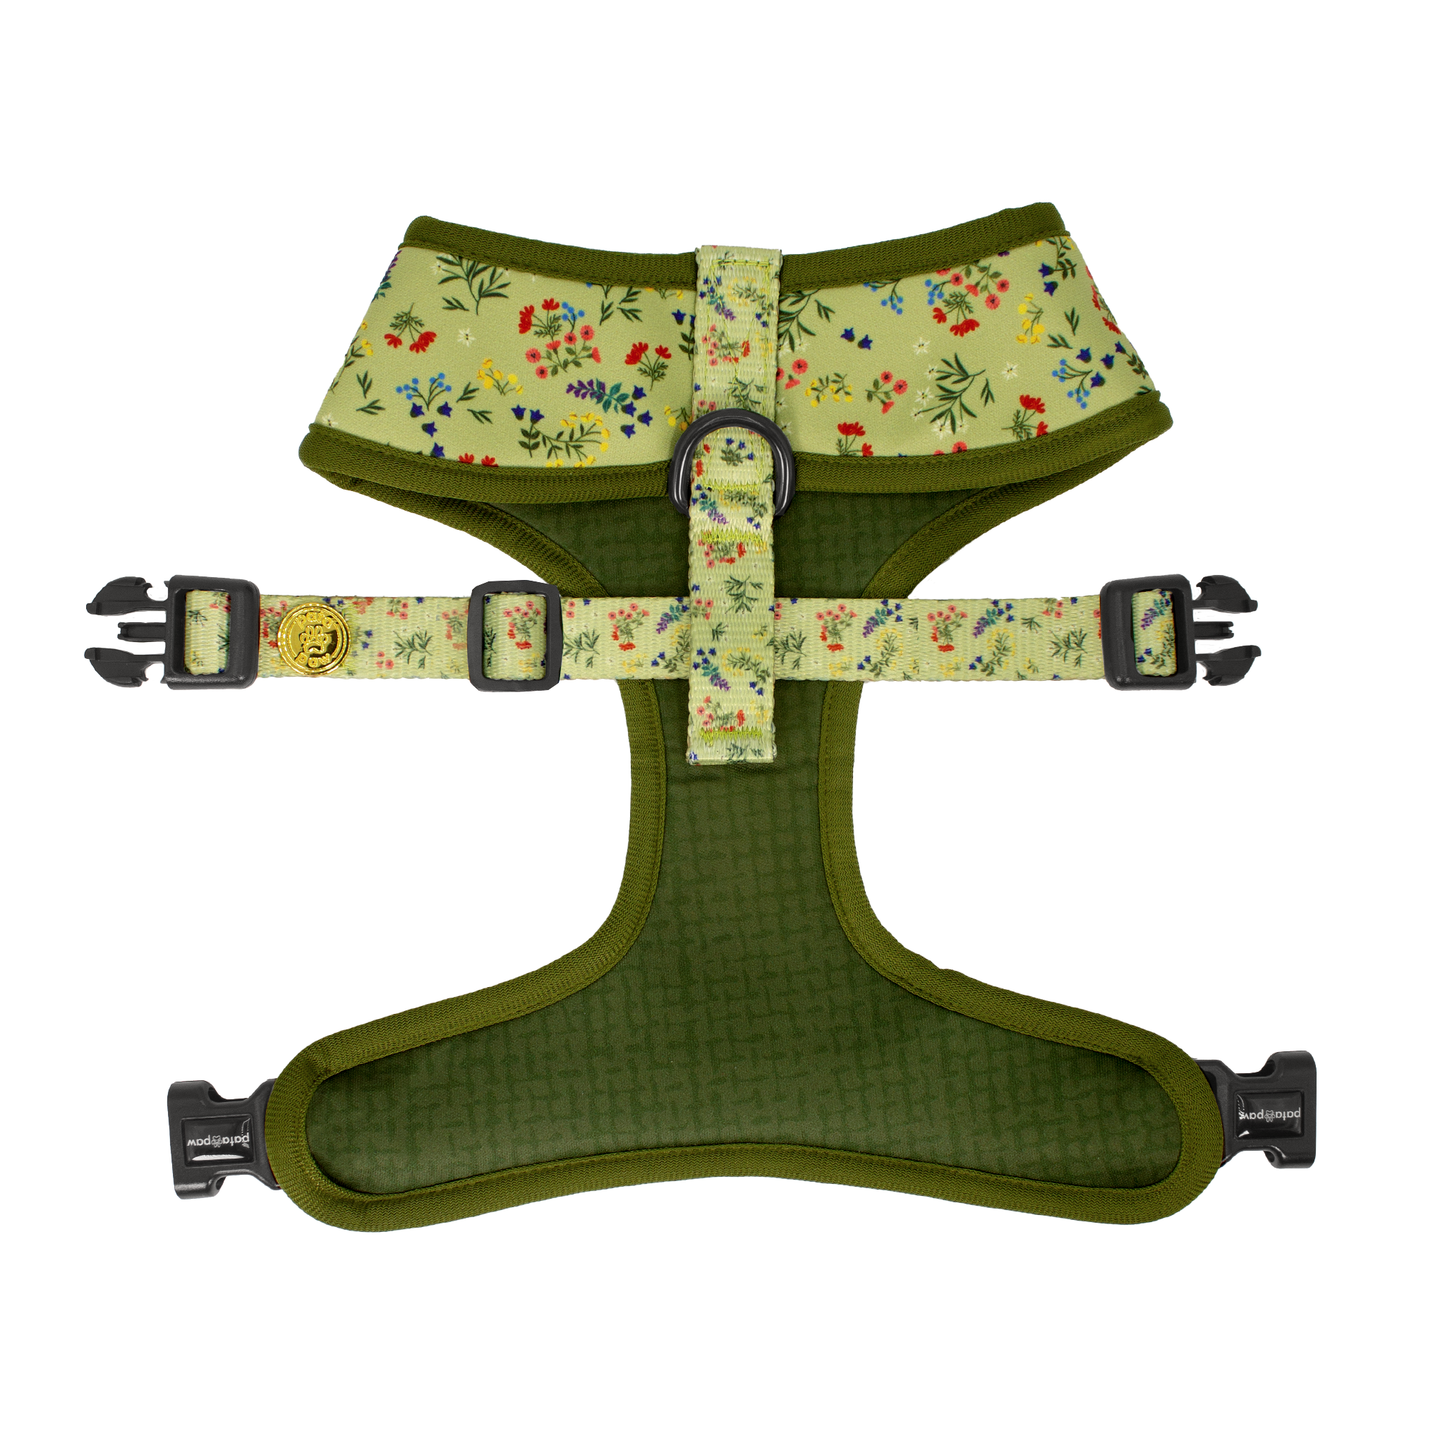 Pata Paw alpine wildflowers reversible harness showing its backside.